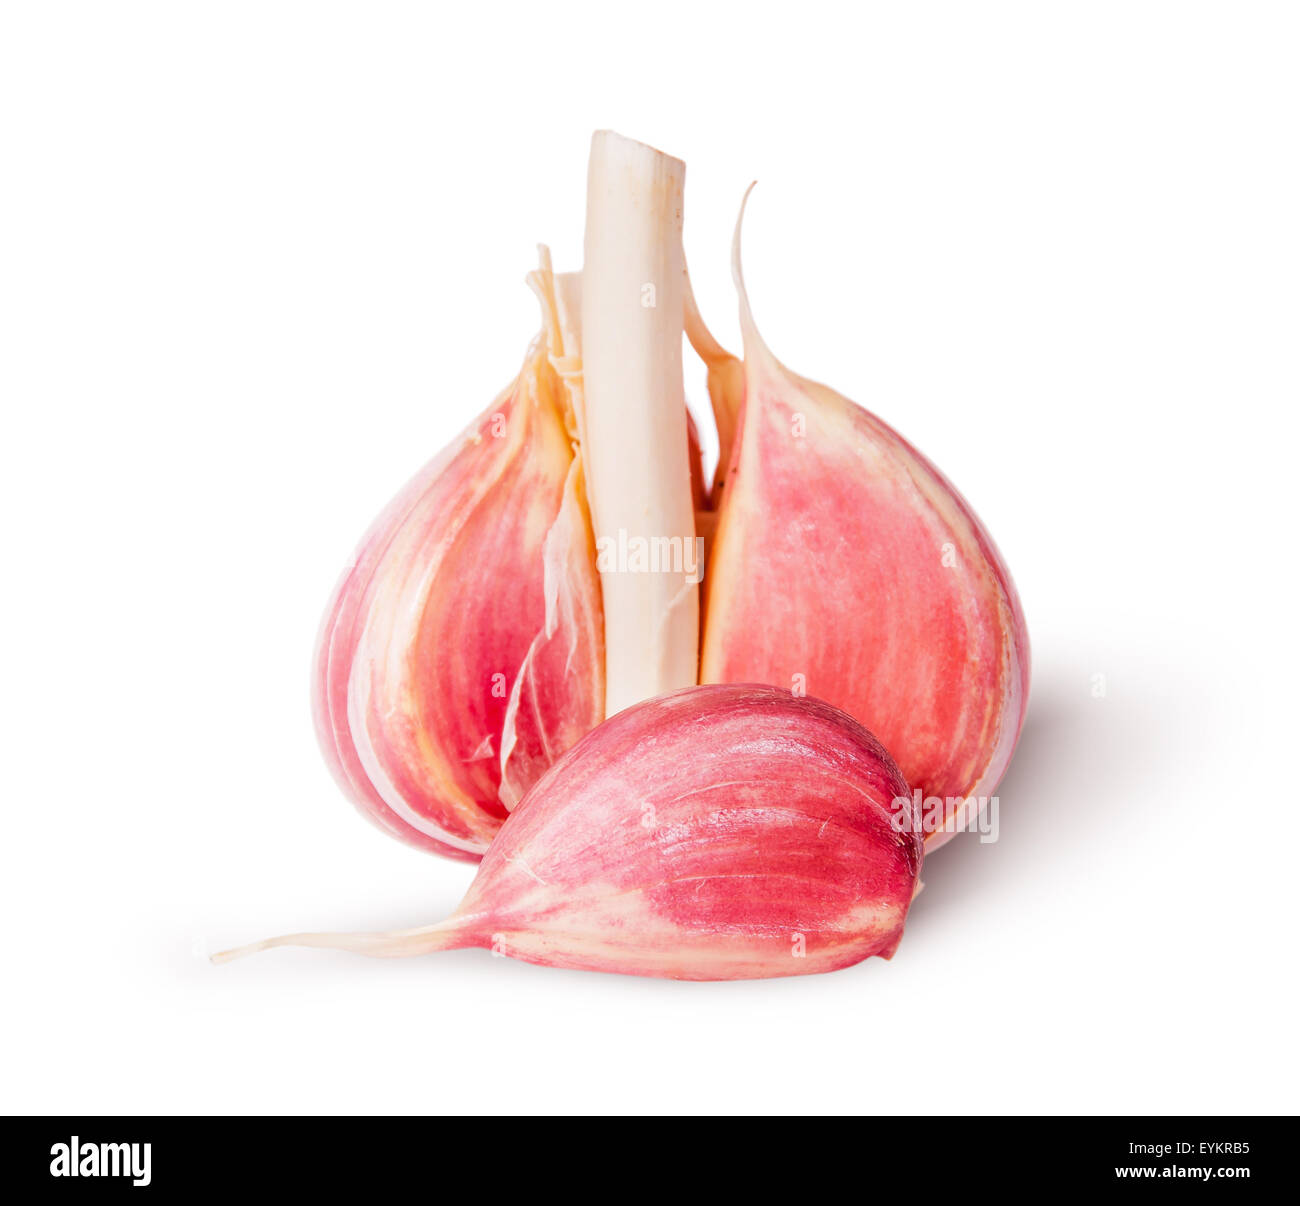 Half of head and one garlic clove isolated on white background Stock Photo